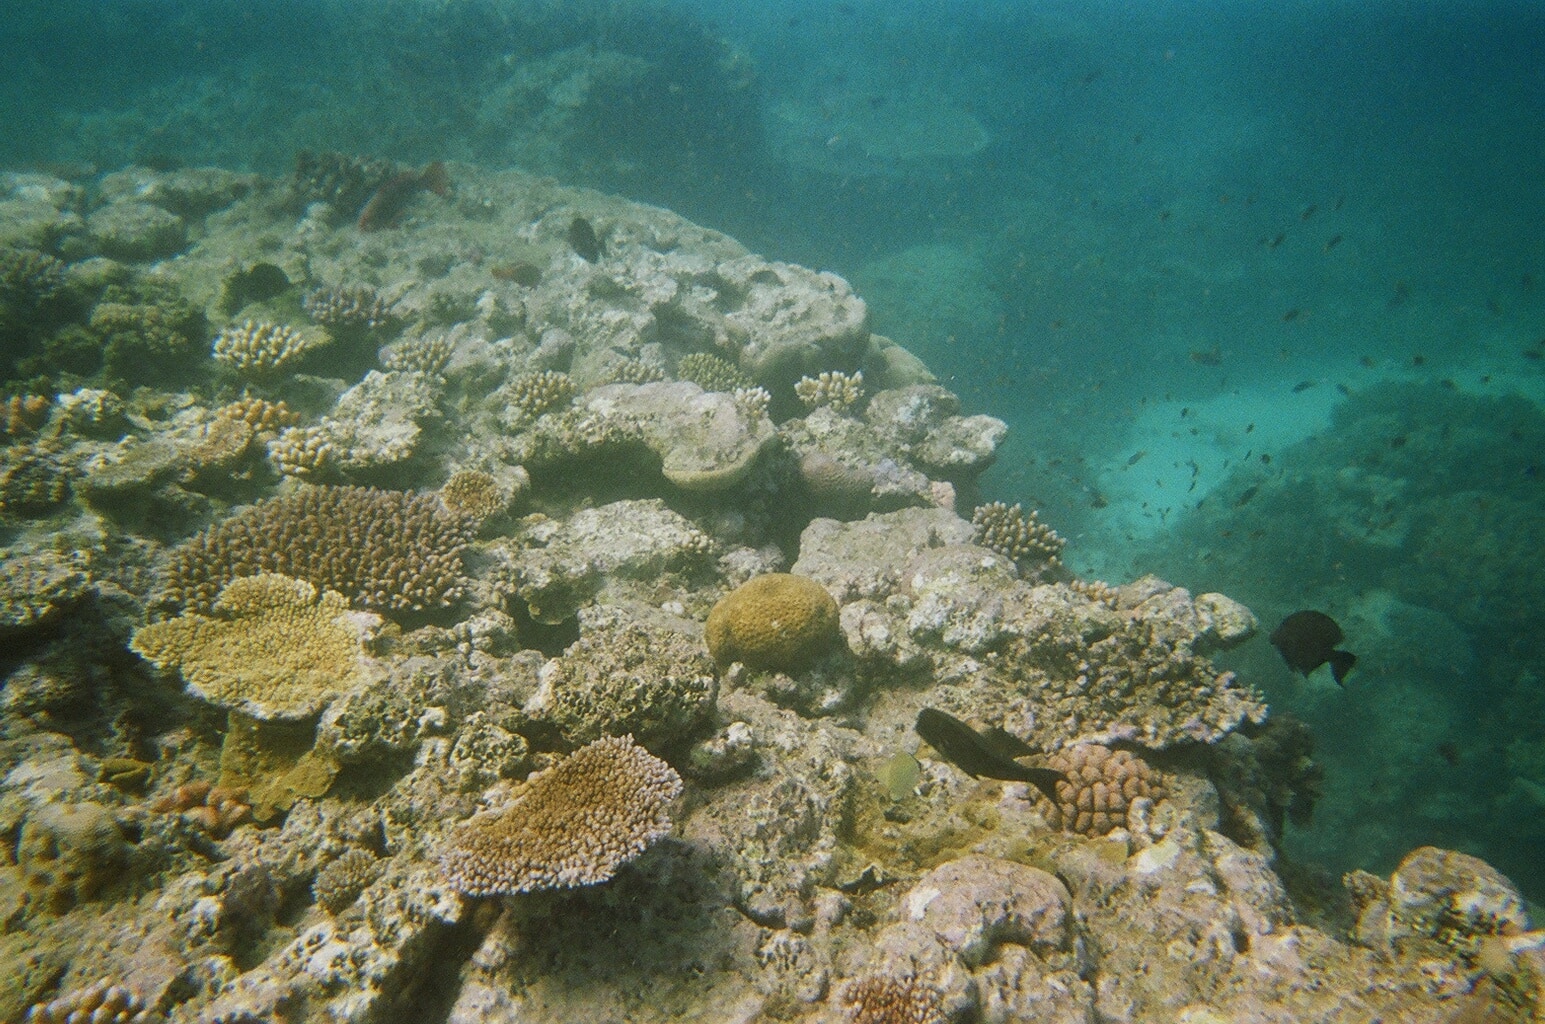 Bleached reef (Wikimedia Commons)